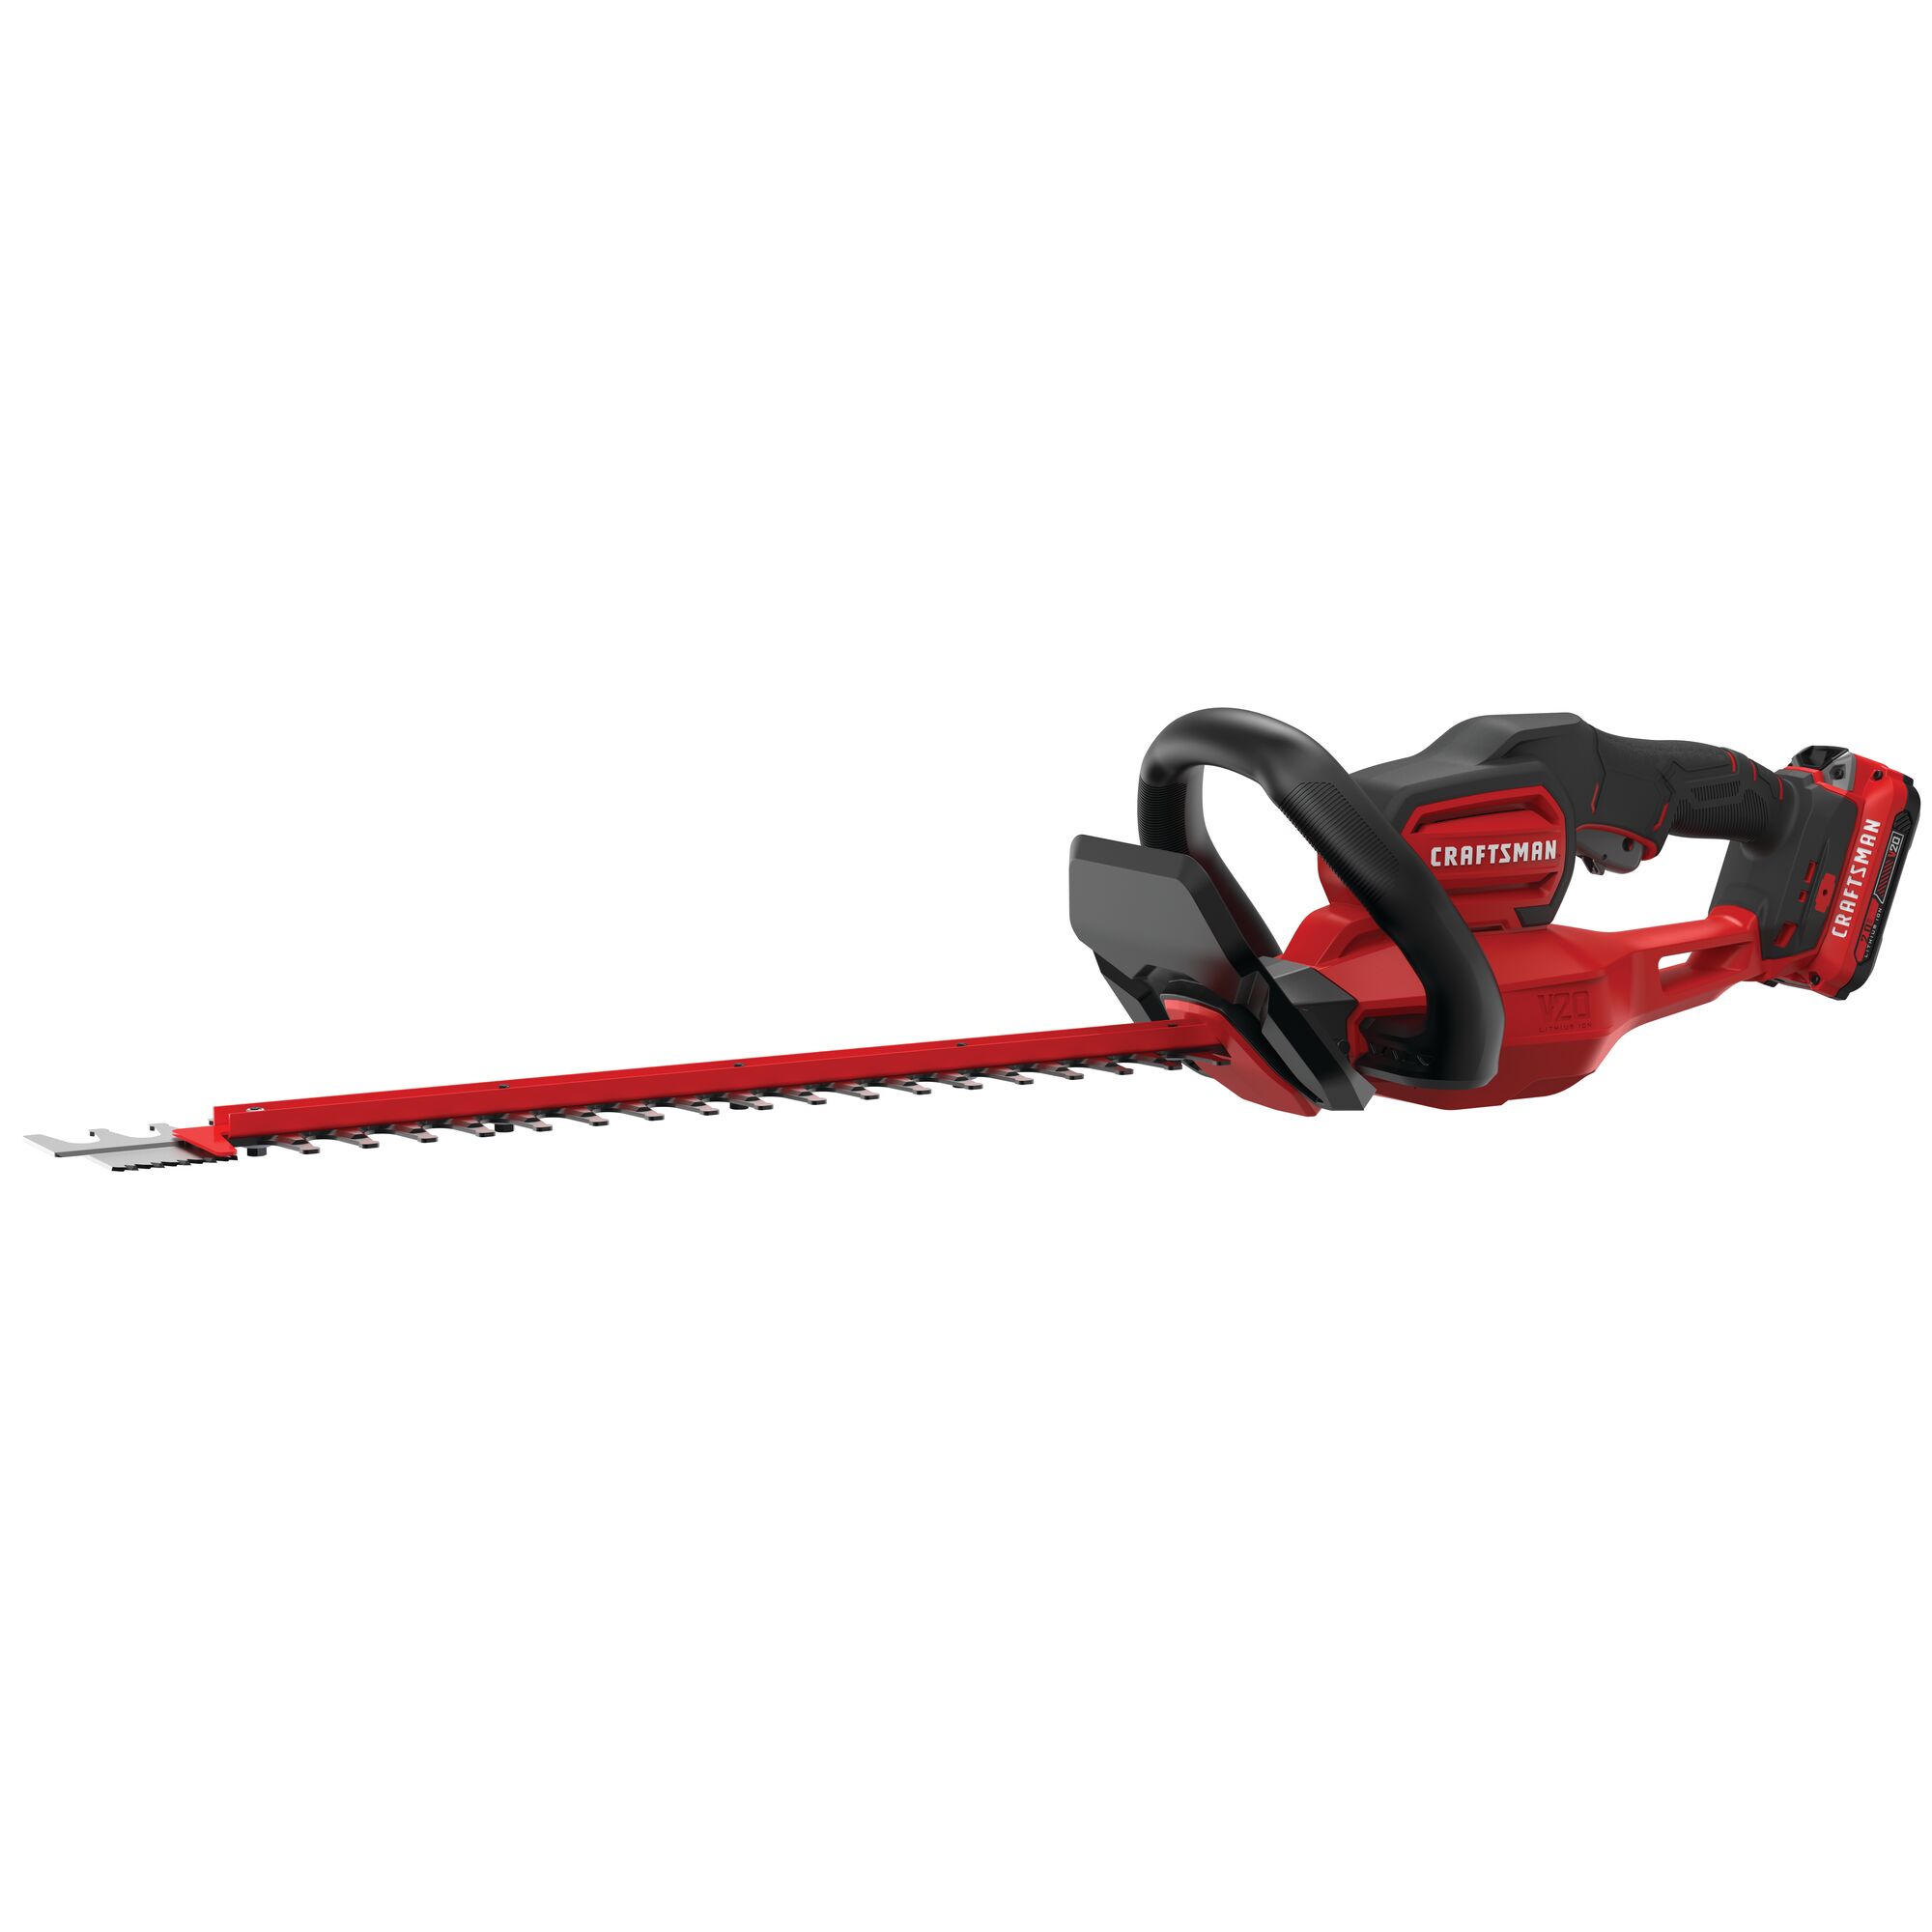 Cordless 22 inch hedge trimmer kit 2 ampere hours.